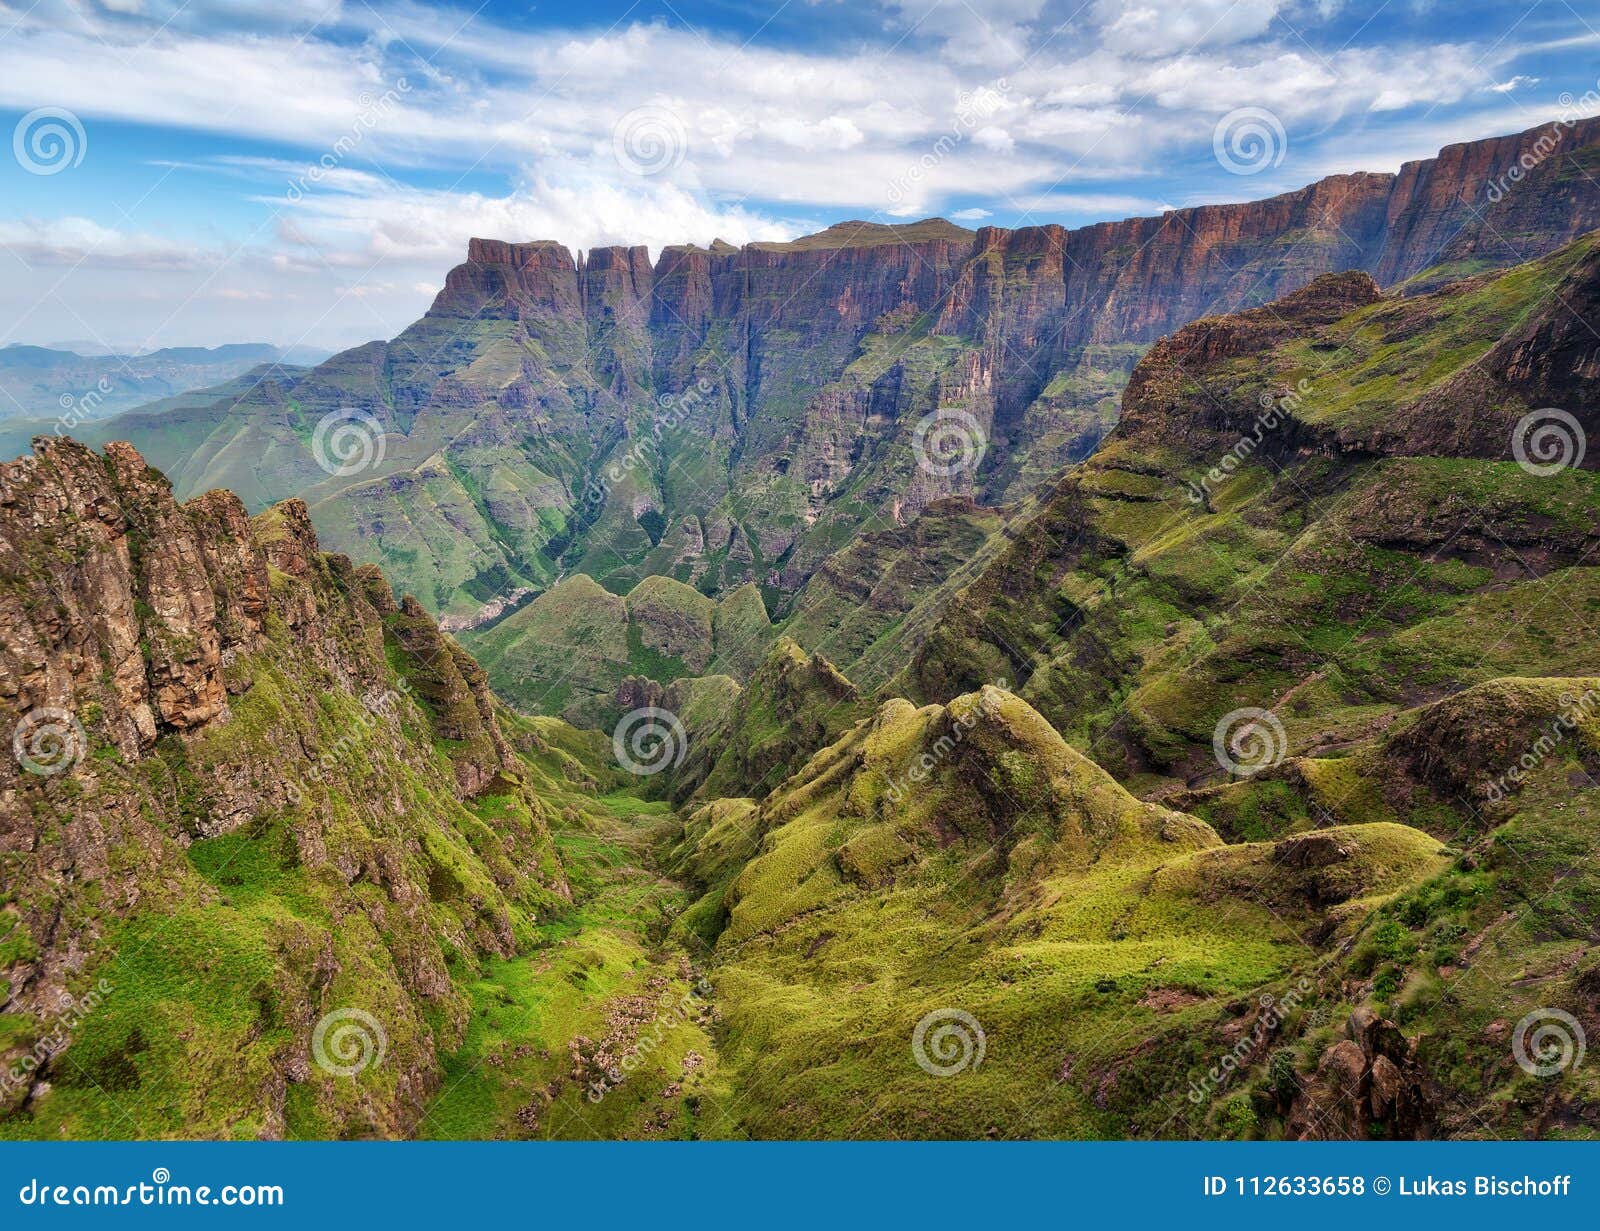 drakensberg amphitheatre in south africa